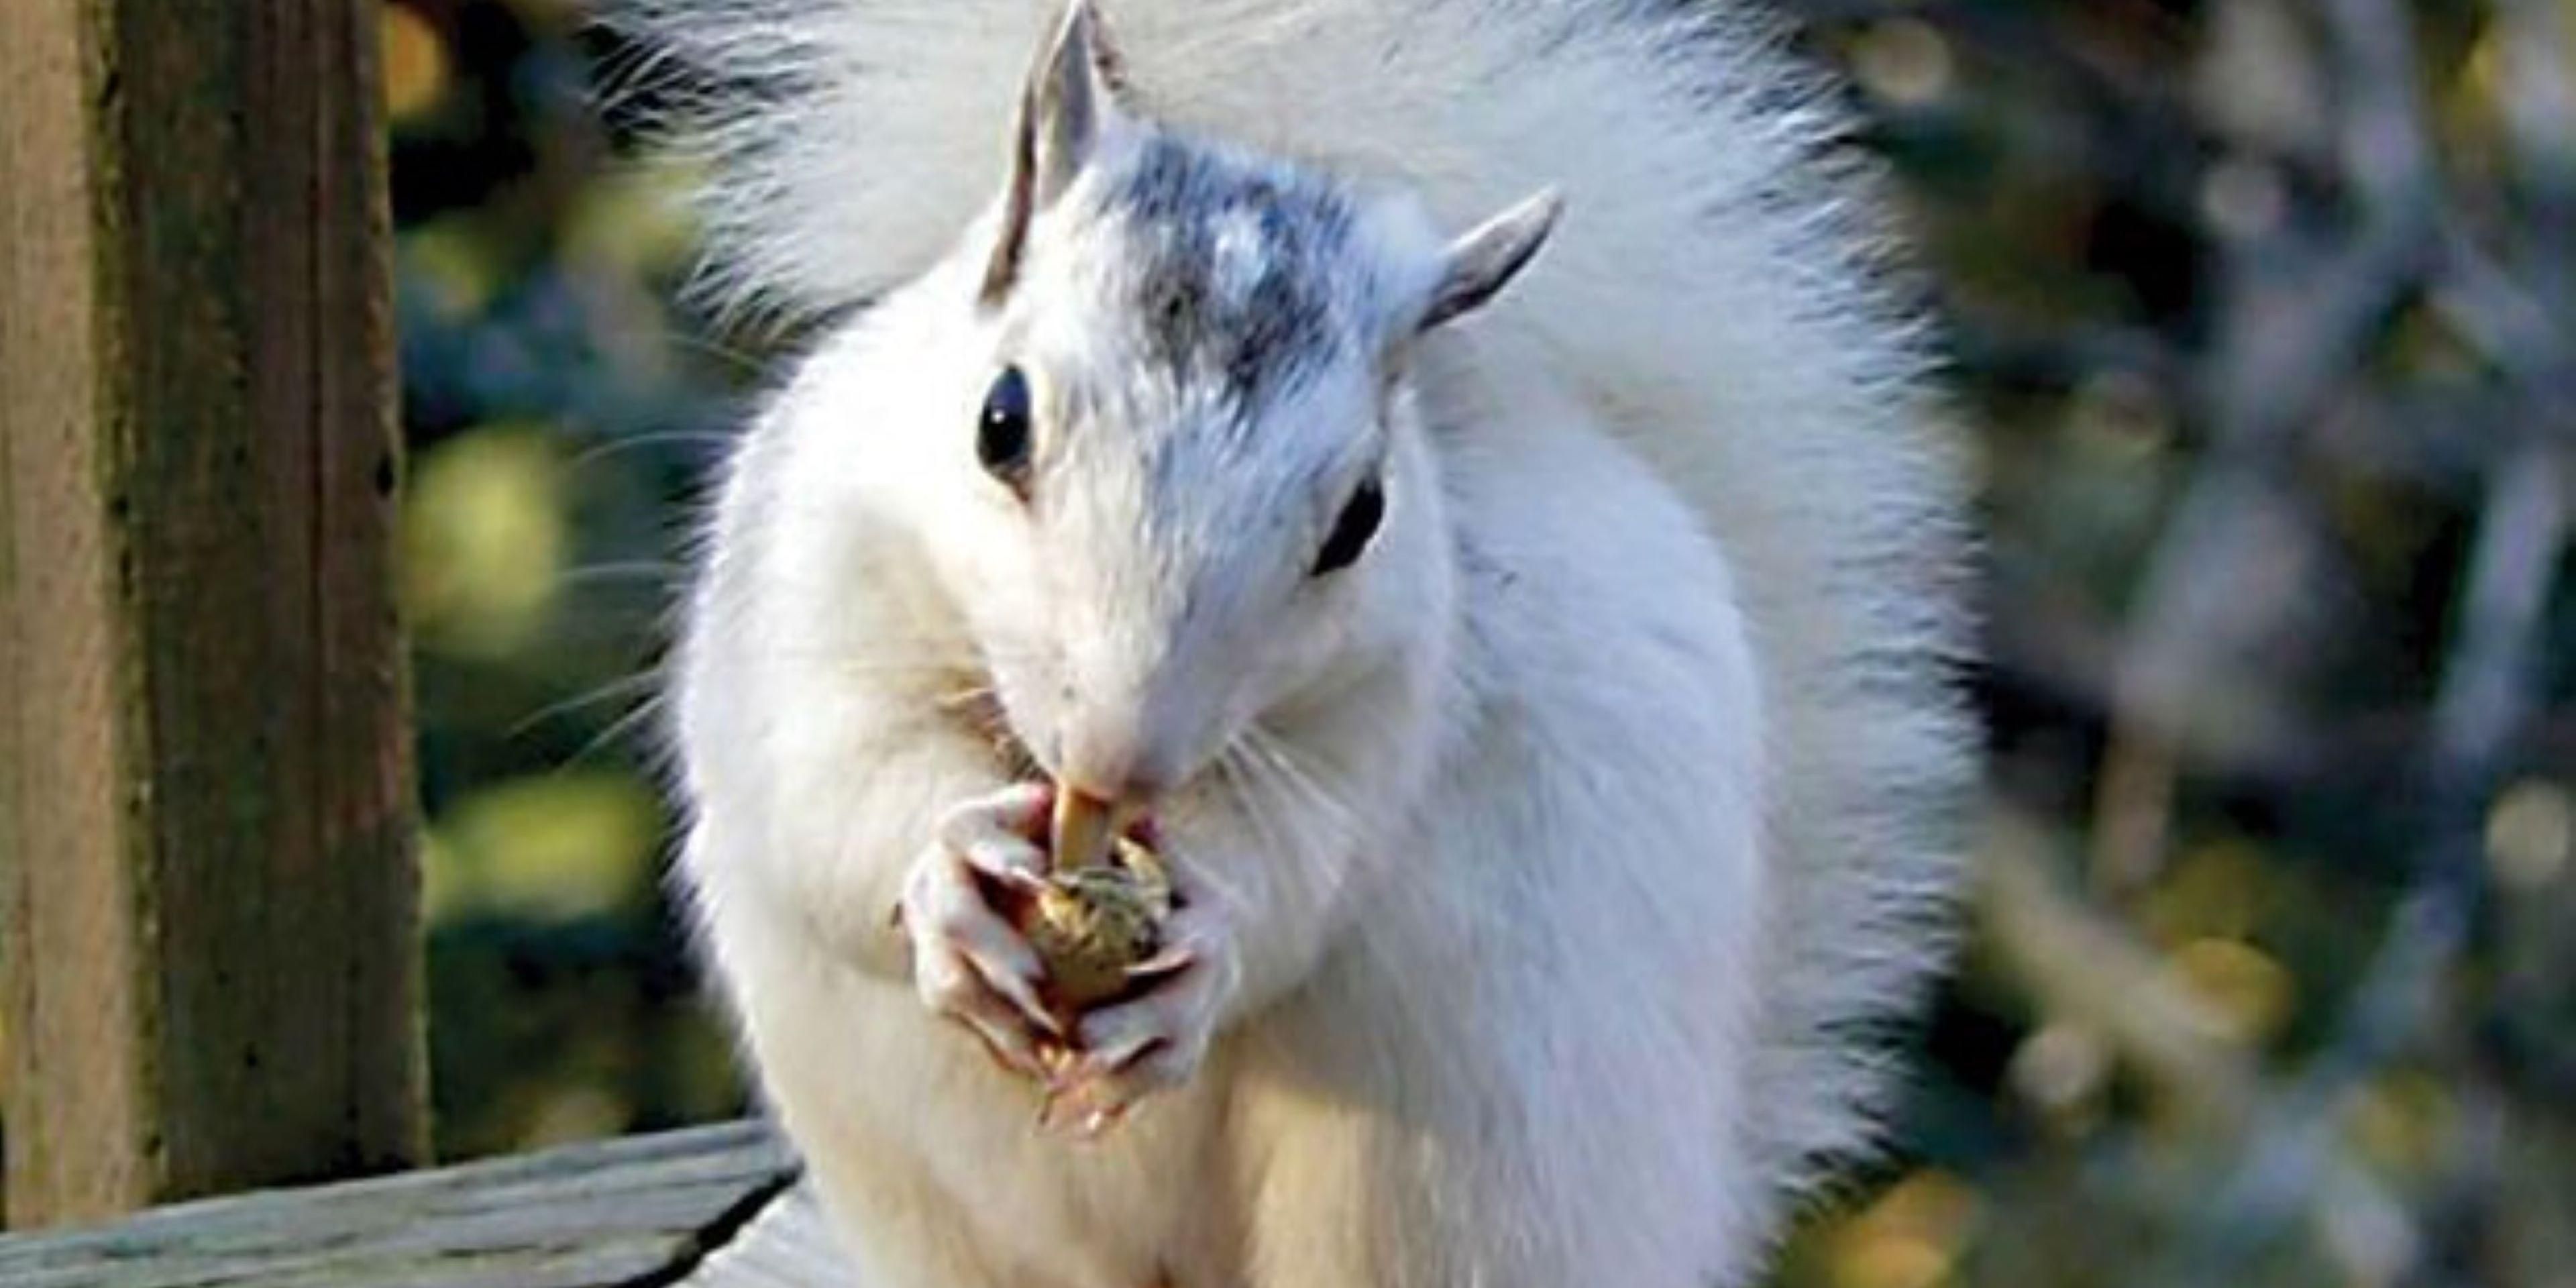 Visit Brevard, NC, home of the famous White Squirrel, who adventures throughout the area hoping to meet new travelers. Join us in celebrating during the White Squirrel Festival in May on Main Street!